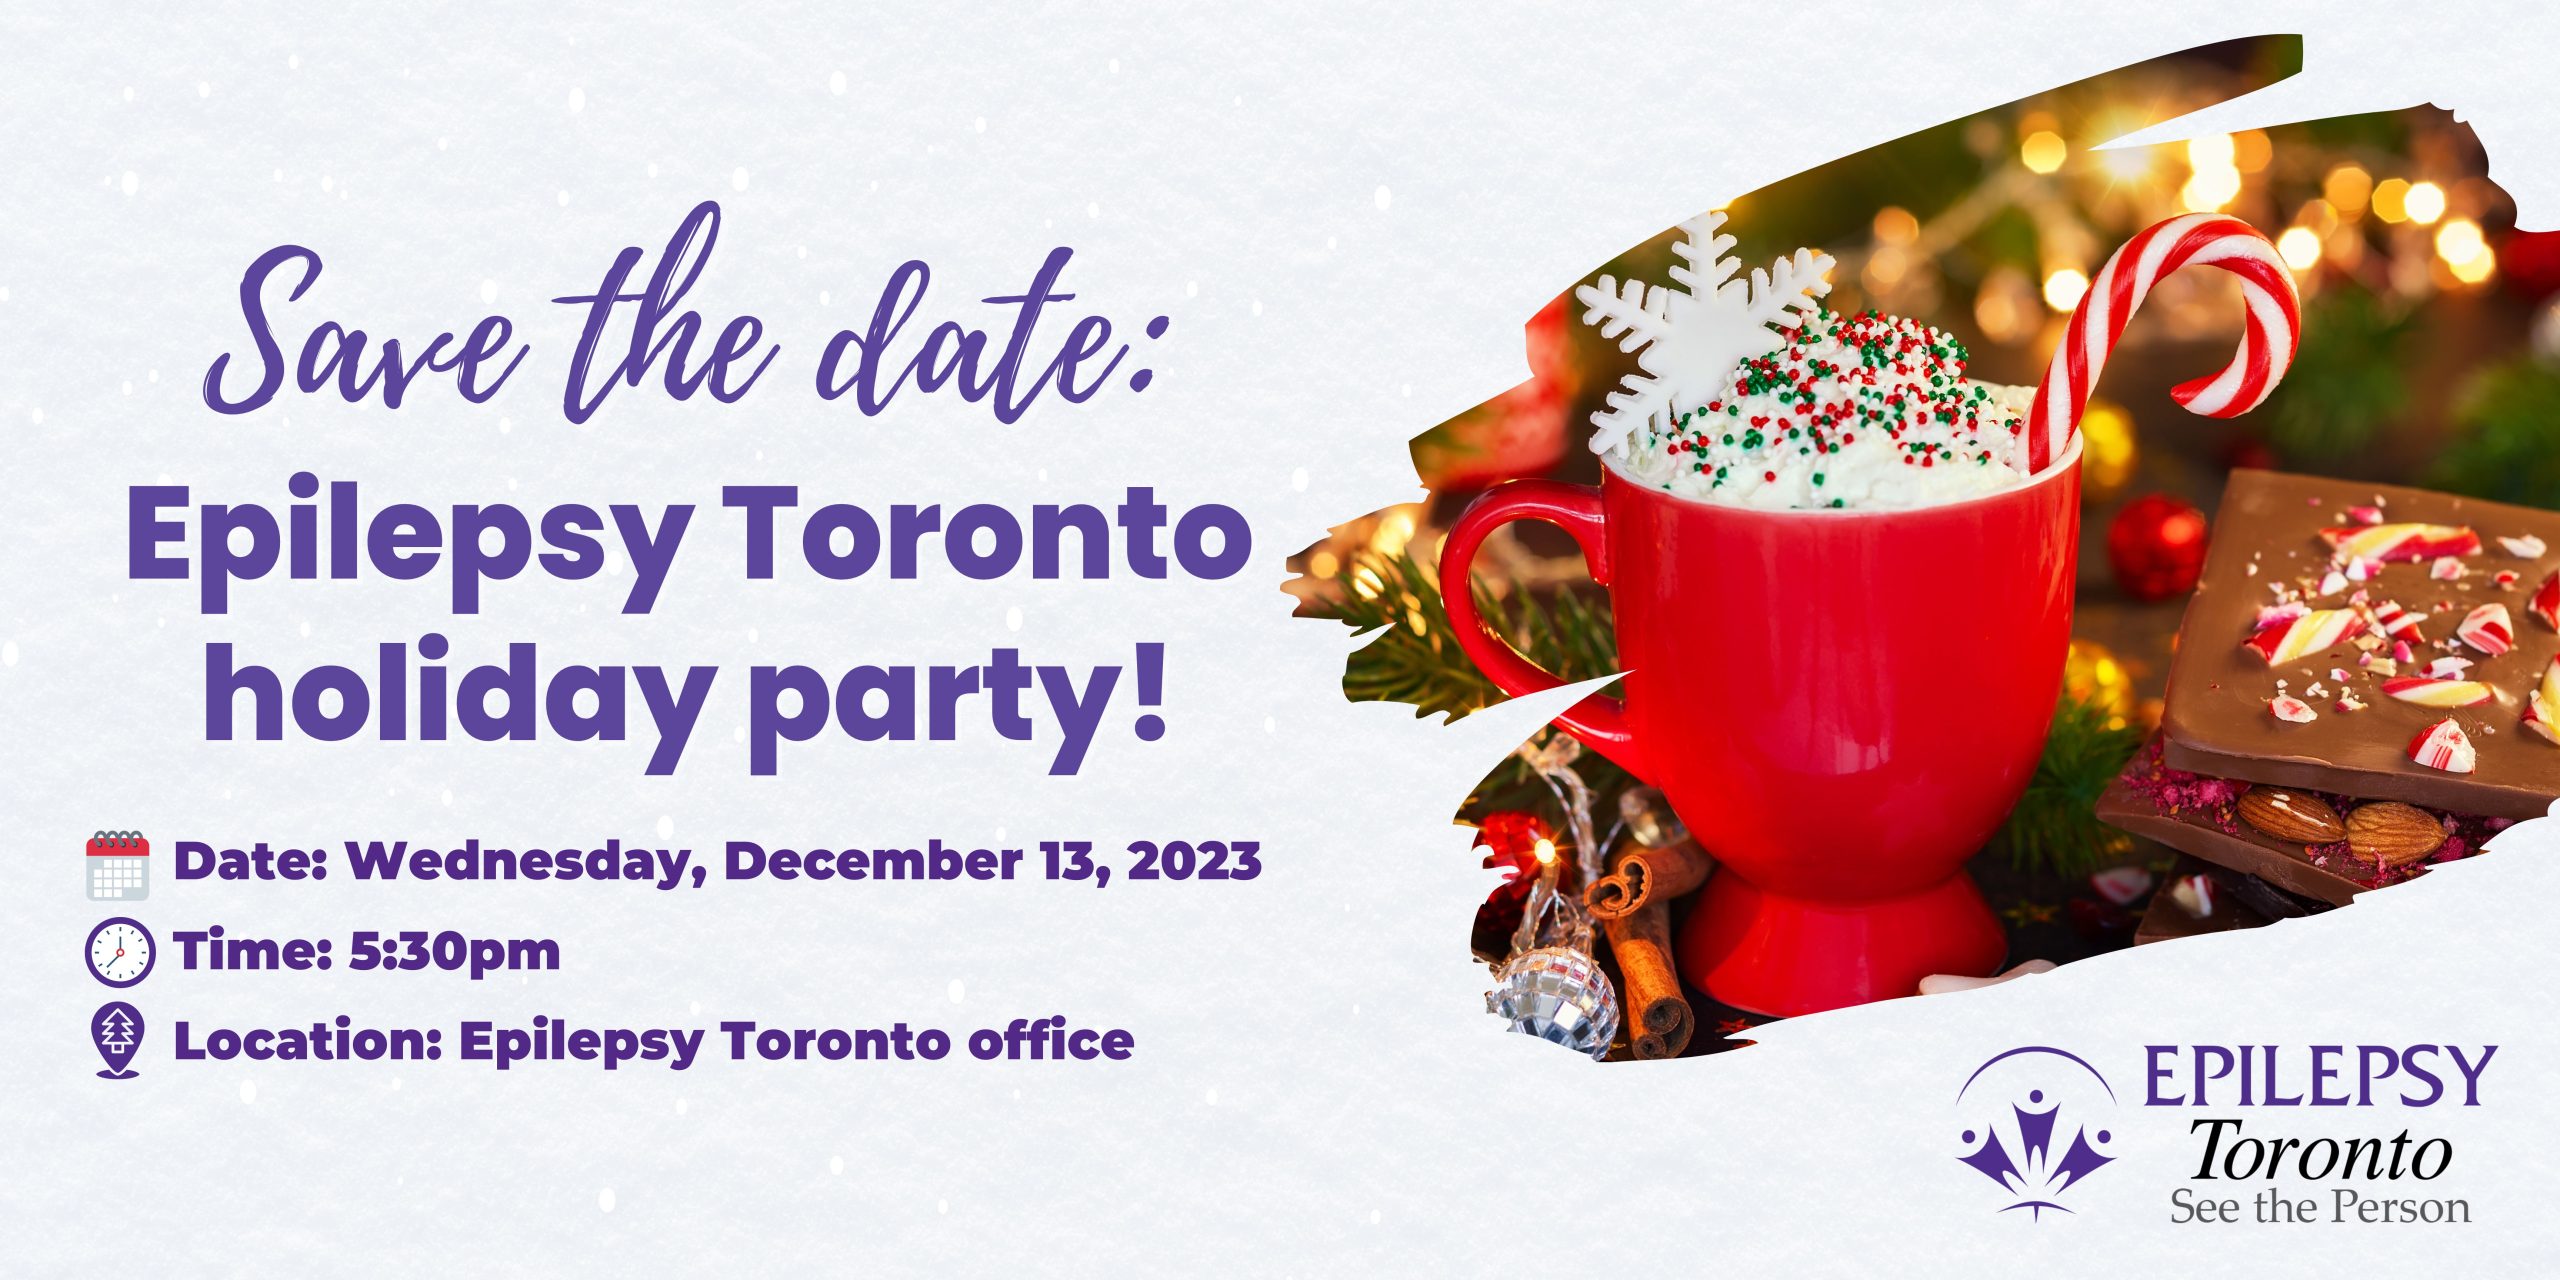 Text: Safe the date. Epilepsy Toronto Holiday Party! Image: a red mug of hot chocolate with a candy cane sticking out.